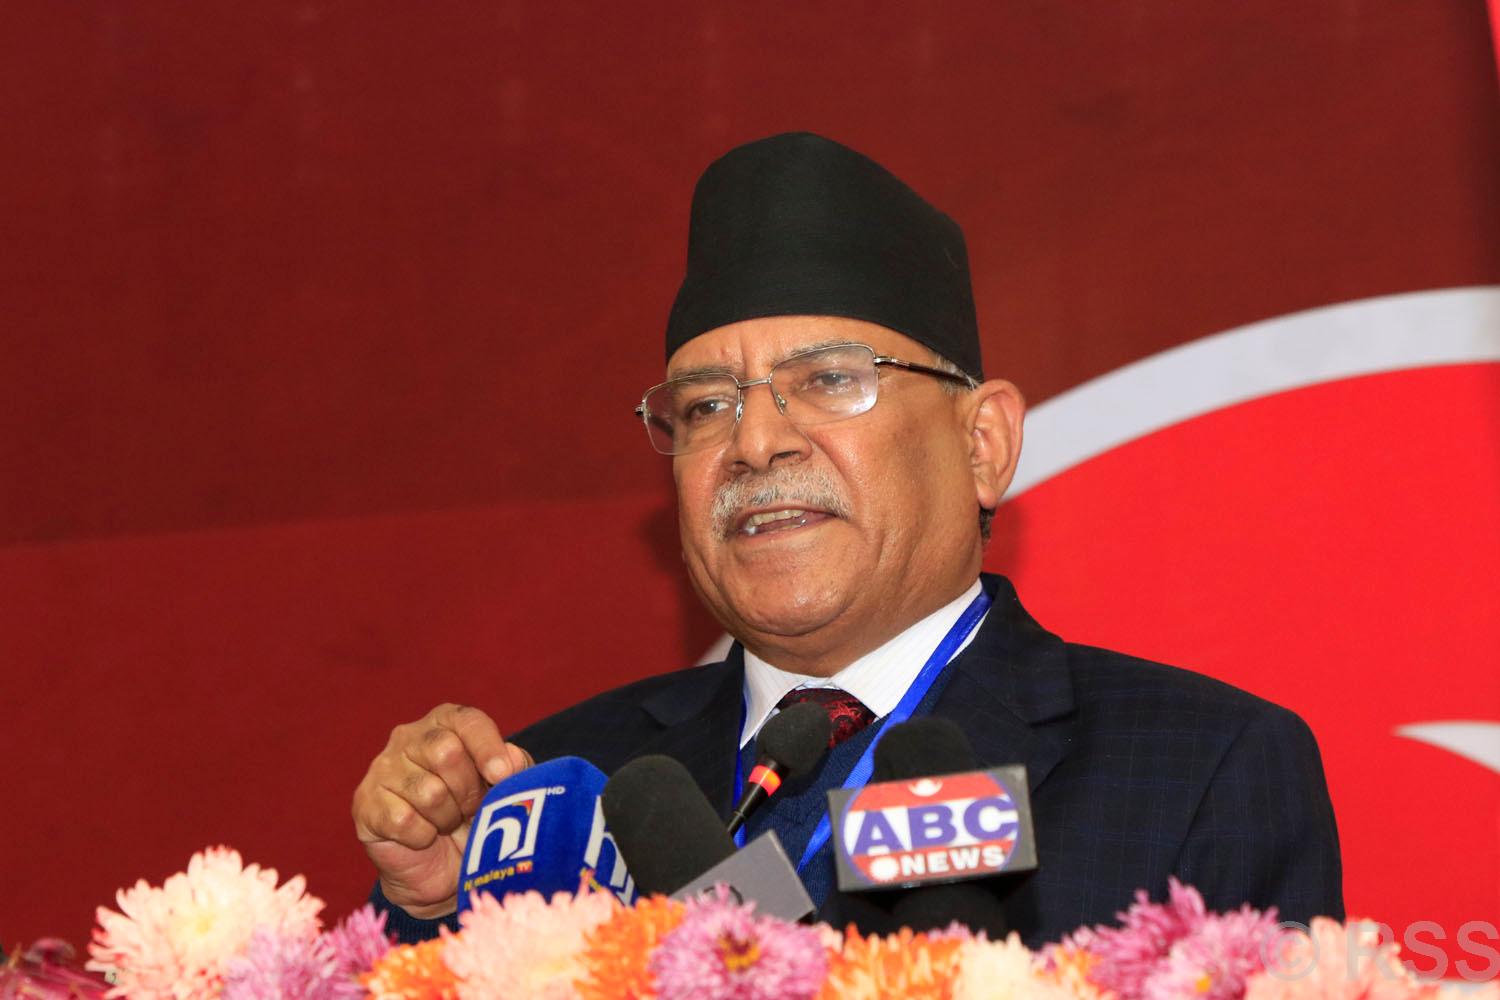  Ruling coalition likely to split due to MCC, says Prachanda